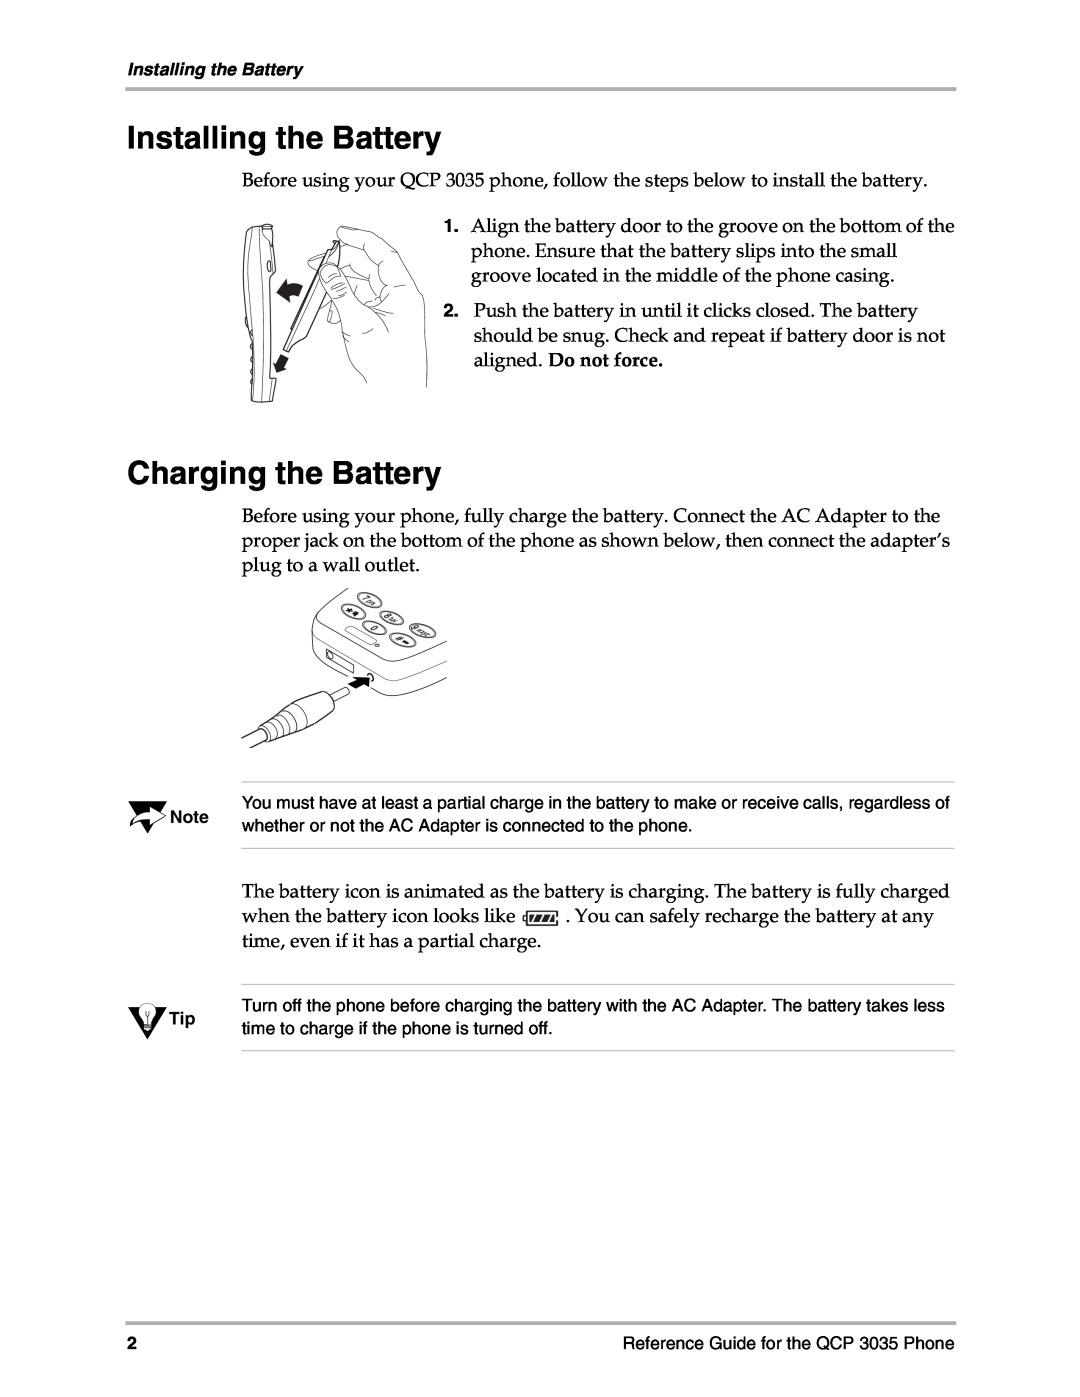 Kyocera 3035 manual Installing the Battery, Charging the Battery, aligned. Do not force 